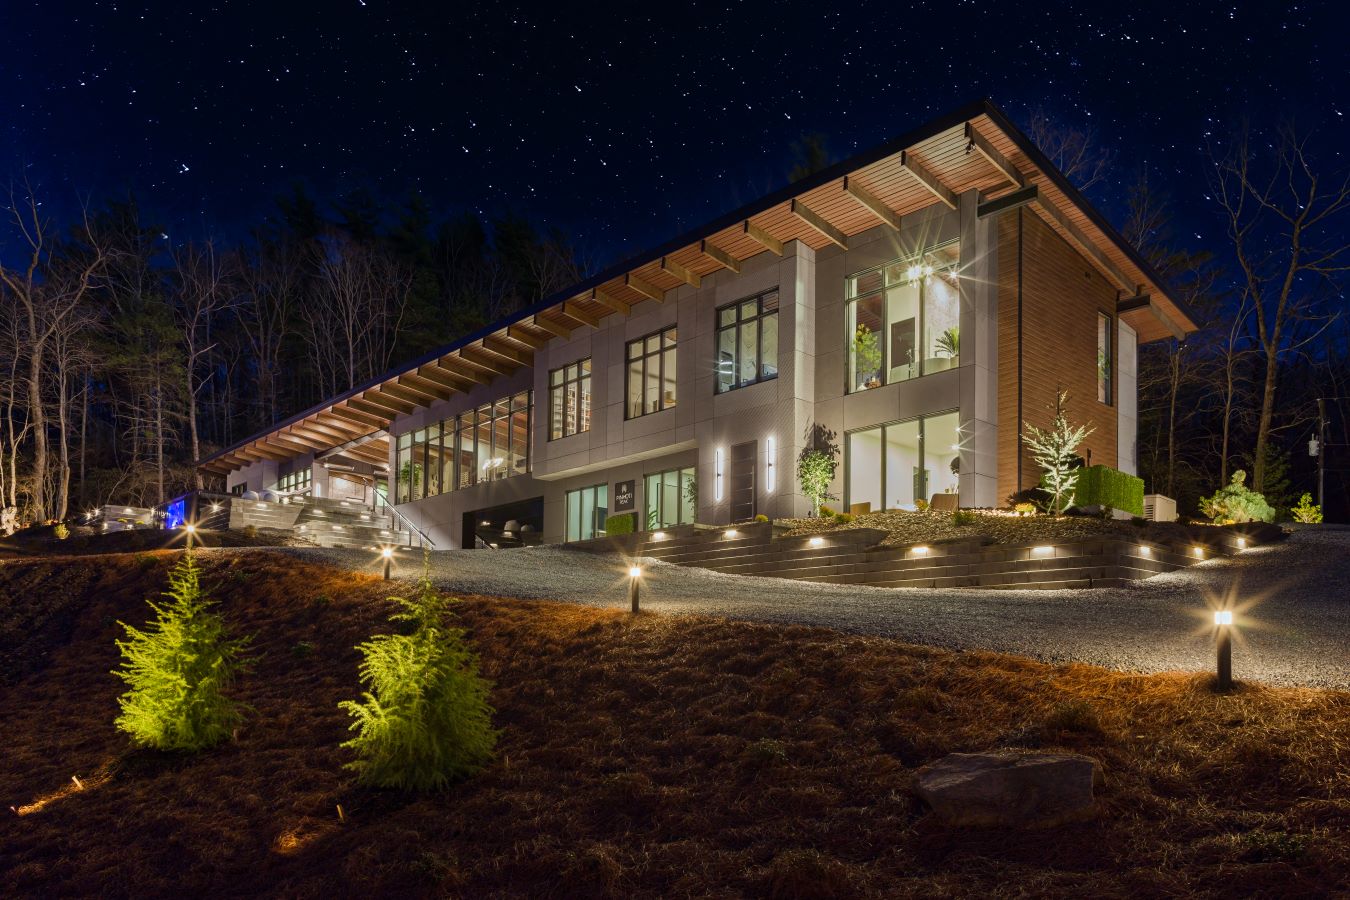 The Future of Living: Inside Chip Wade’s Mountain Show Home and the Tender Living Phenomenon